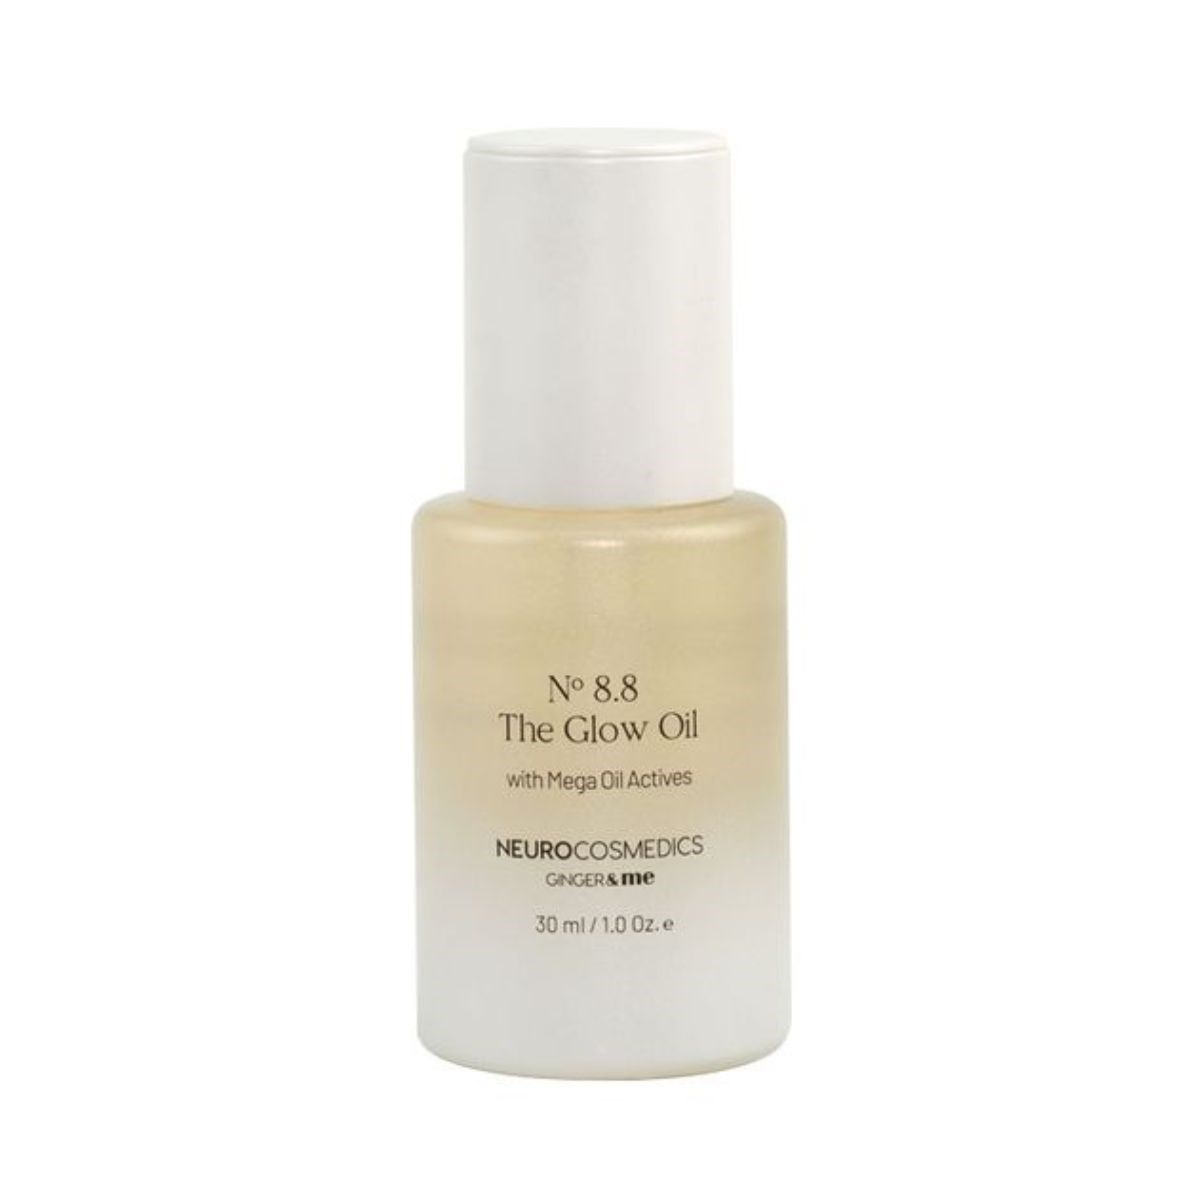 Ginger & Me The Glow Oil